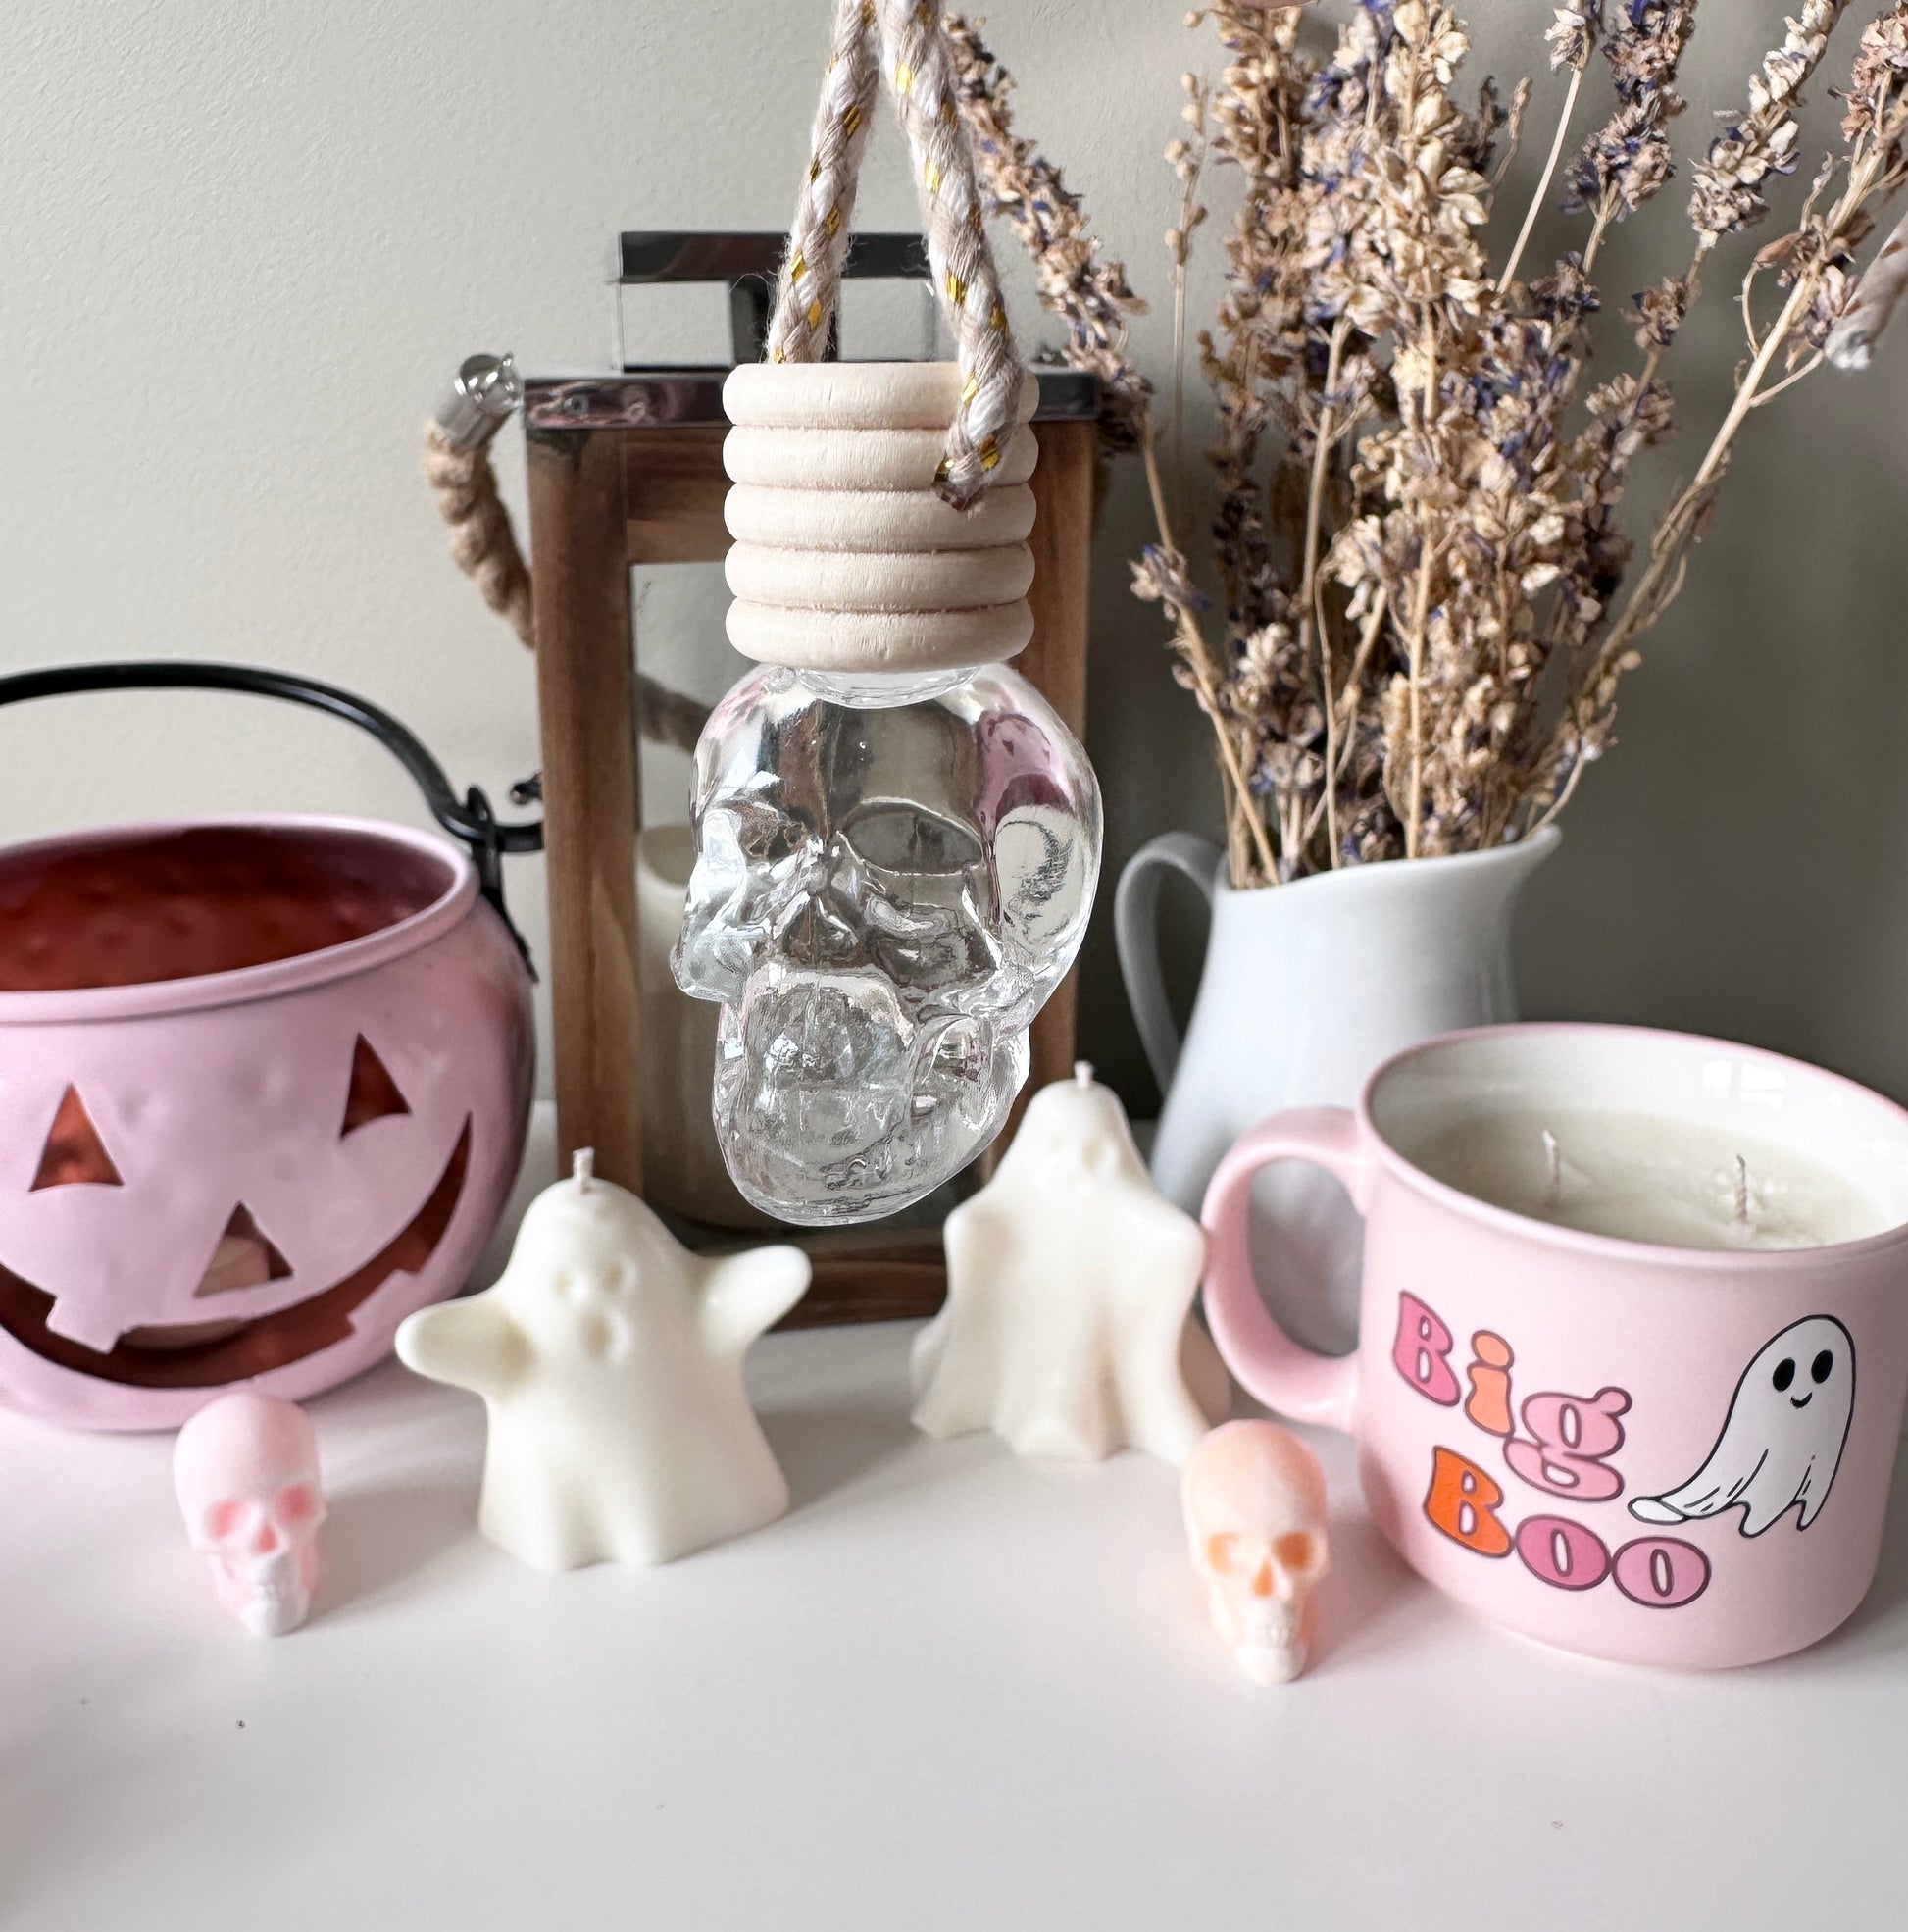 Skull Car Diffuser - 1 For $10.50 or 3 For $27 – Broxton Lane Candle Co